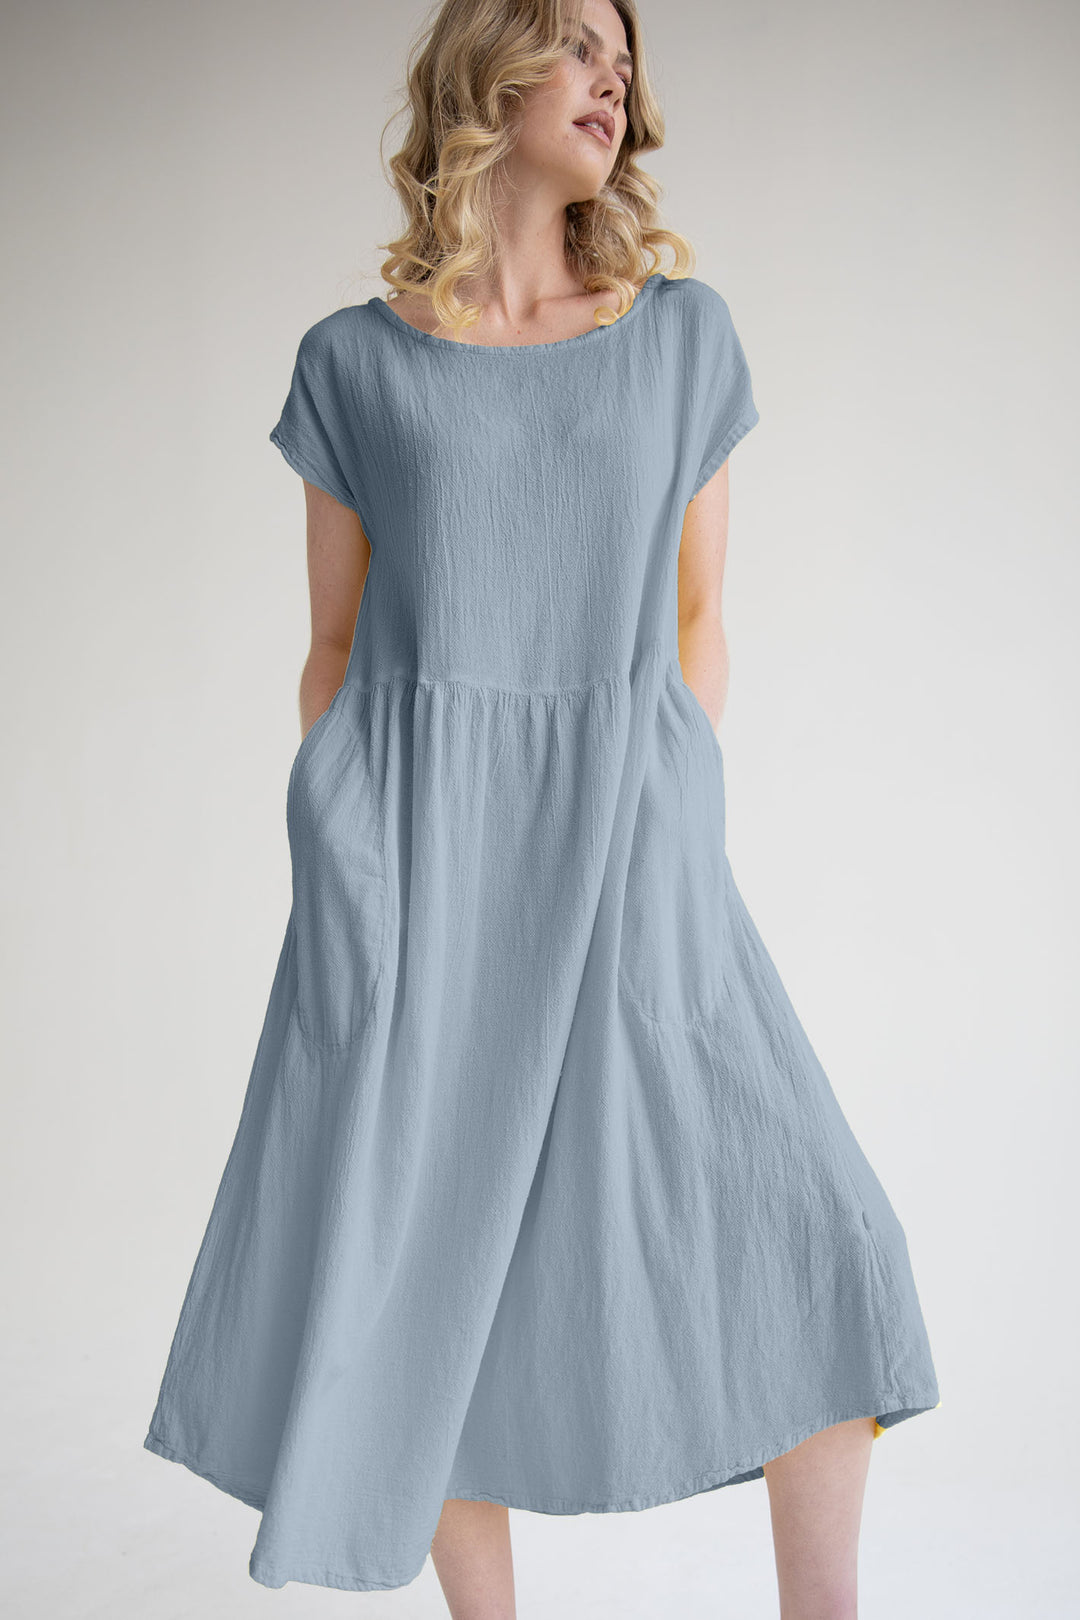 Onelife D625 Alba Dusty Blue Boat Neck Cap Sleeve Dress - Experience Boutique